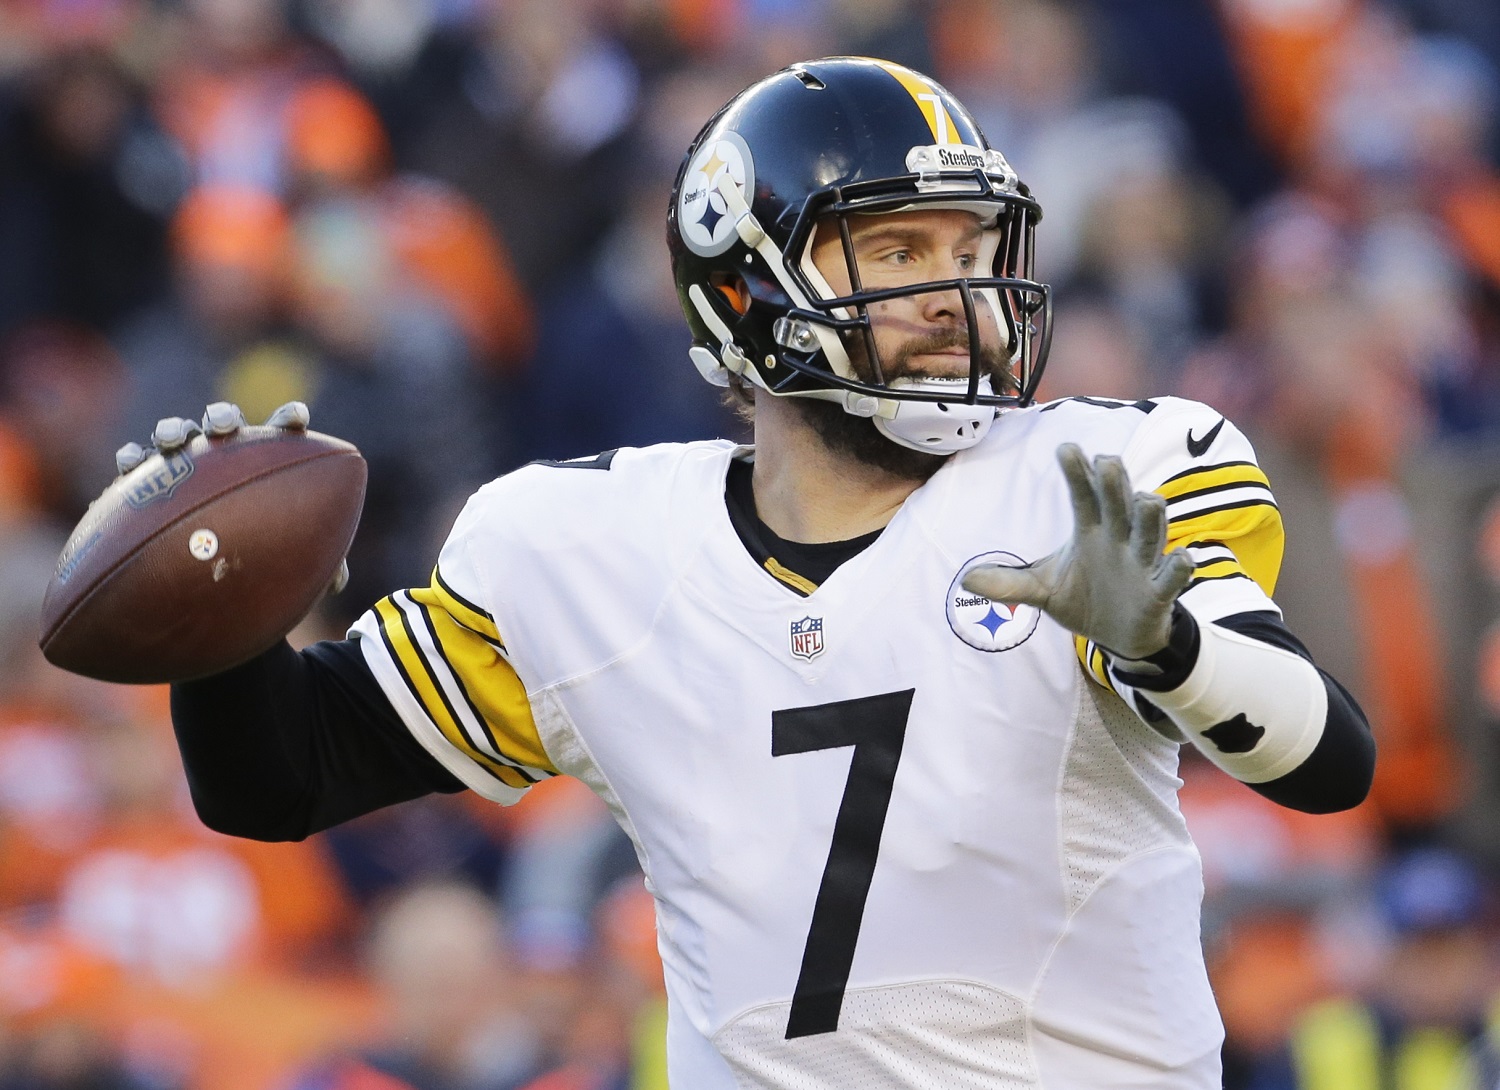 Pittsburgh Steelers quarterback Ben Roethlisberger passes against the Denver Broncos during the first half in an NFL football divisional playoff game, Sunday, Jan. 17, 2016, in Denver. (AP Photo/Joe Mahoney)